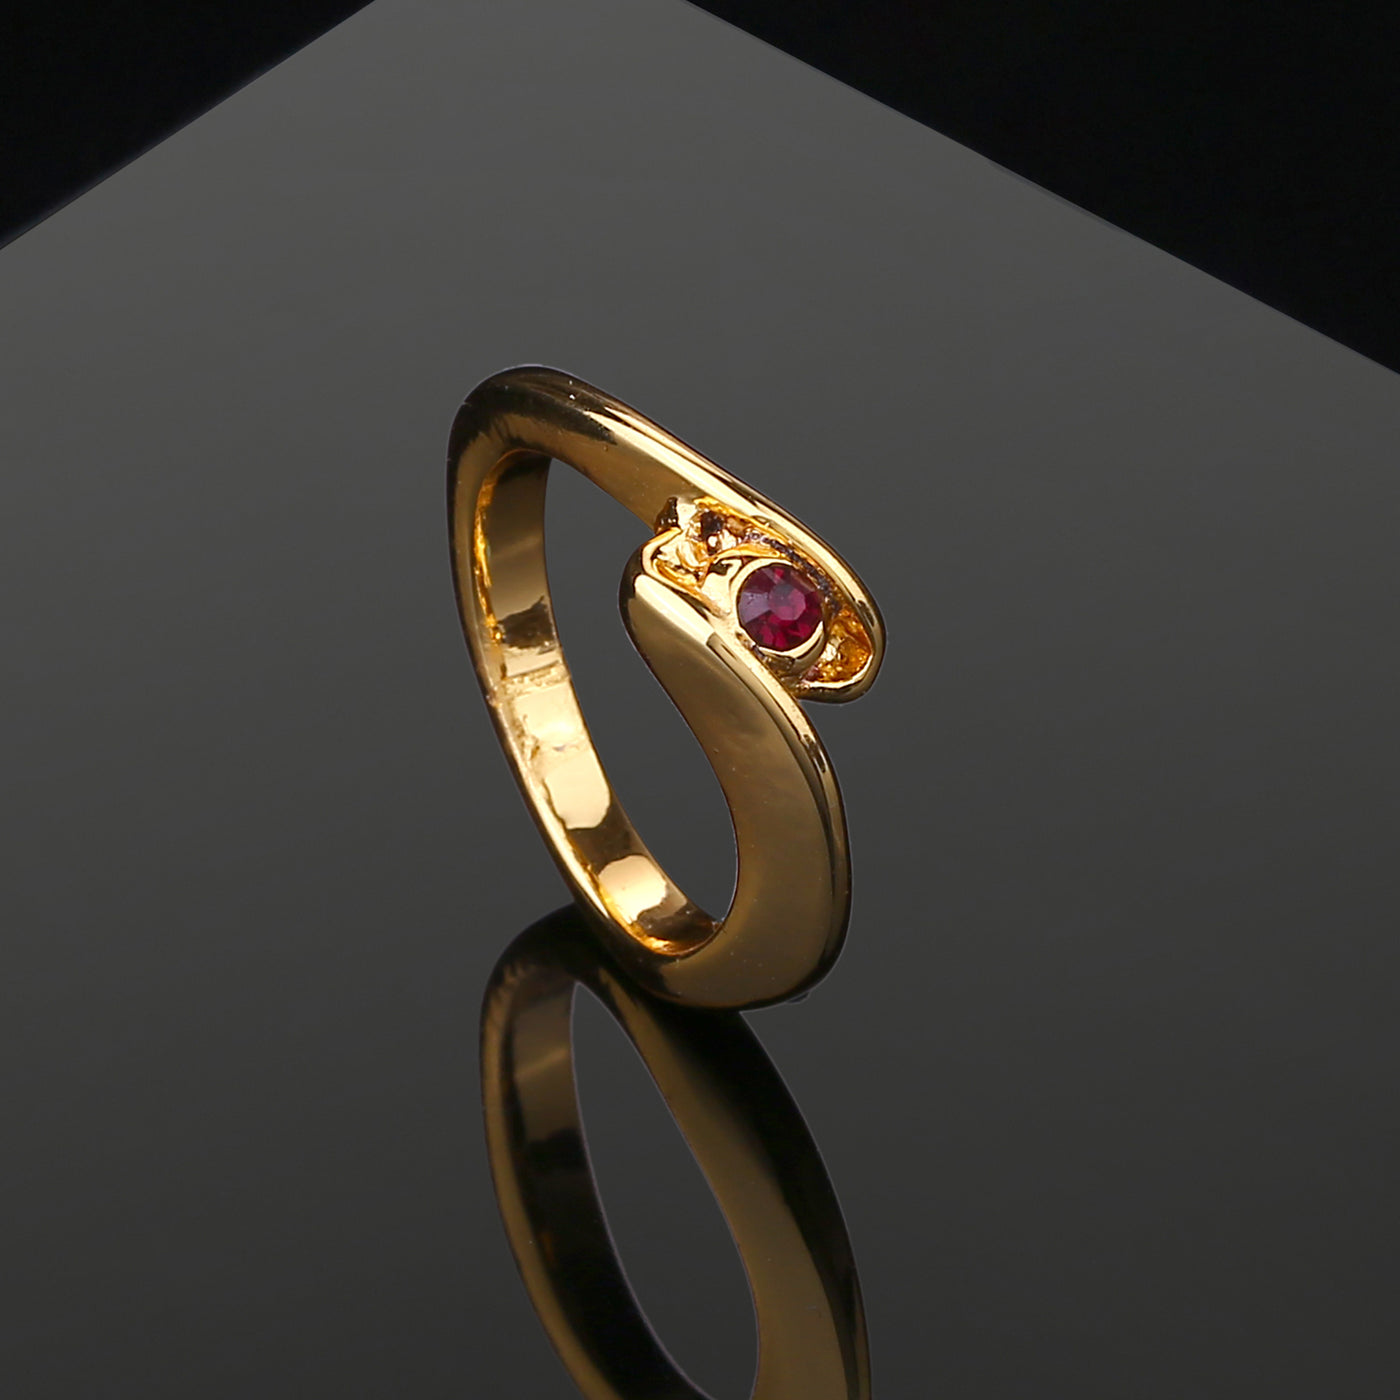 Estele Gold Plated Exquisite Finger Ring for Women